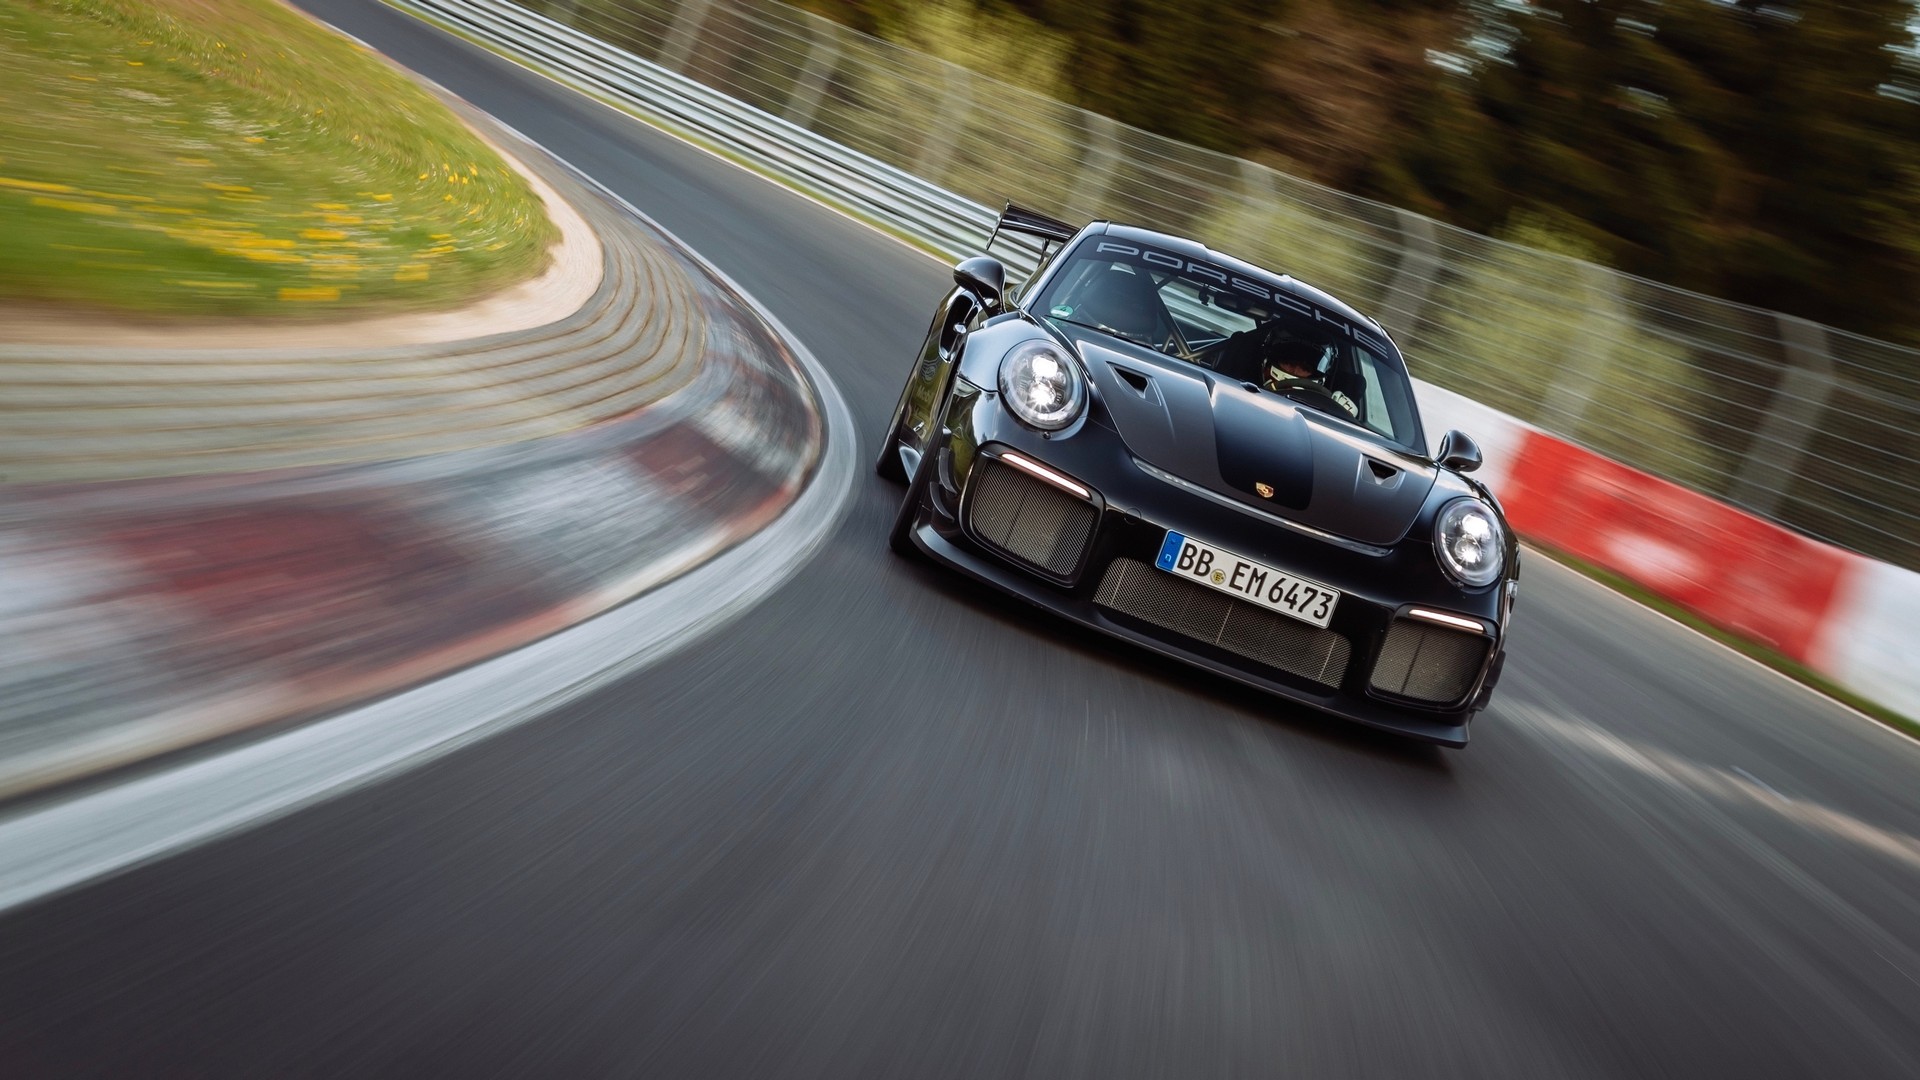 Porsche-911-GT2-RS-With-Manthey-Performance-Kit-14.jpg